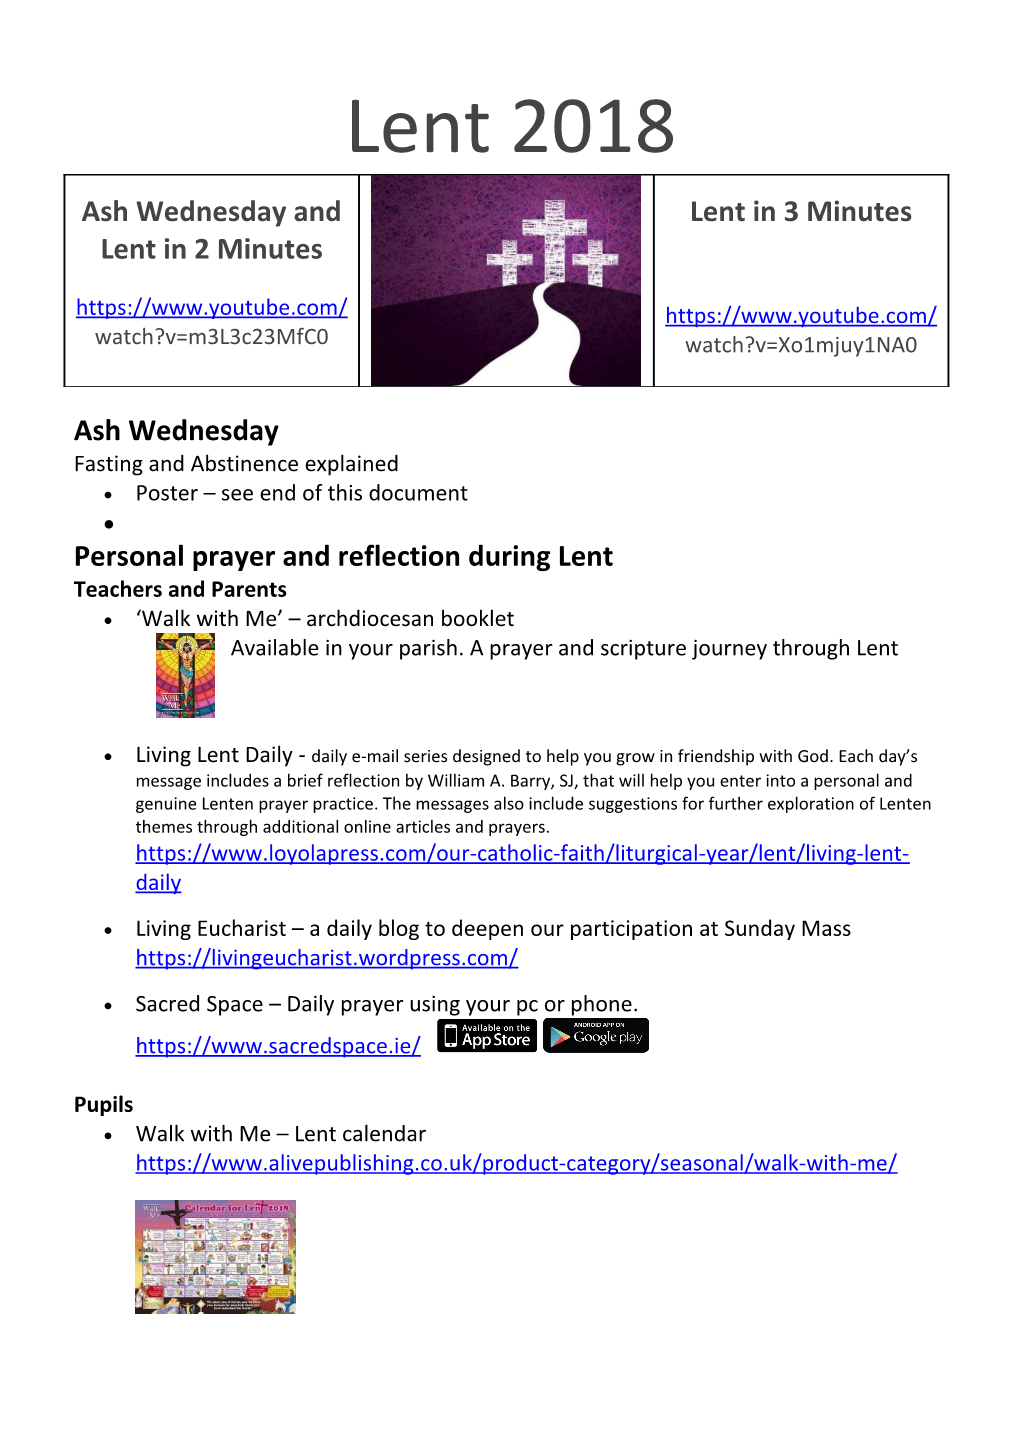 Personal Prayer and Reflection During Lent